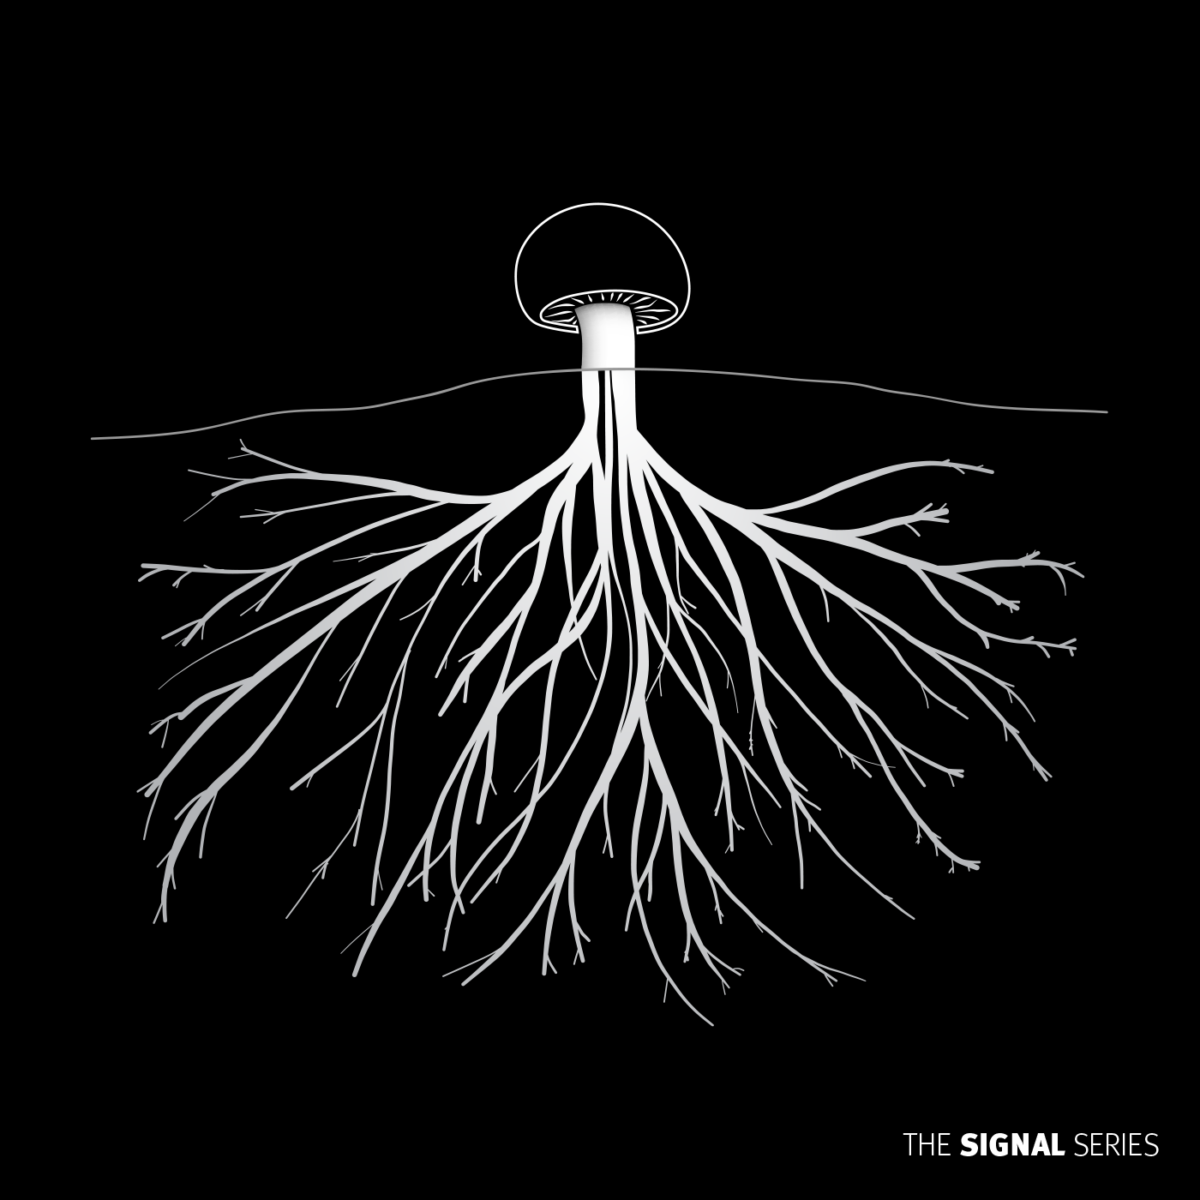 Cover image, an illustration of a mushroom with roots, in a black background